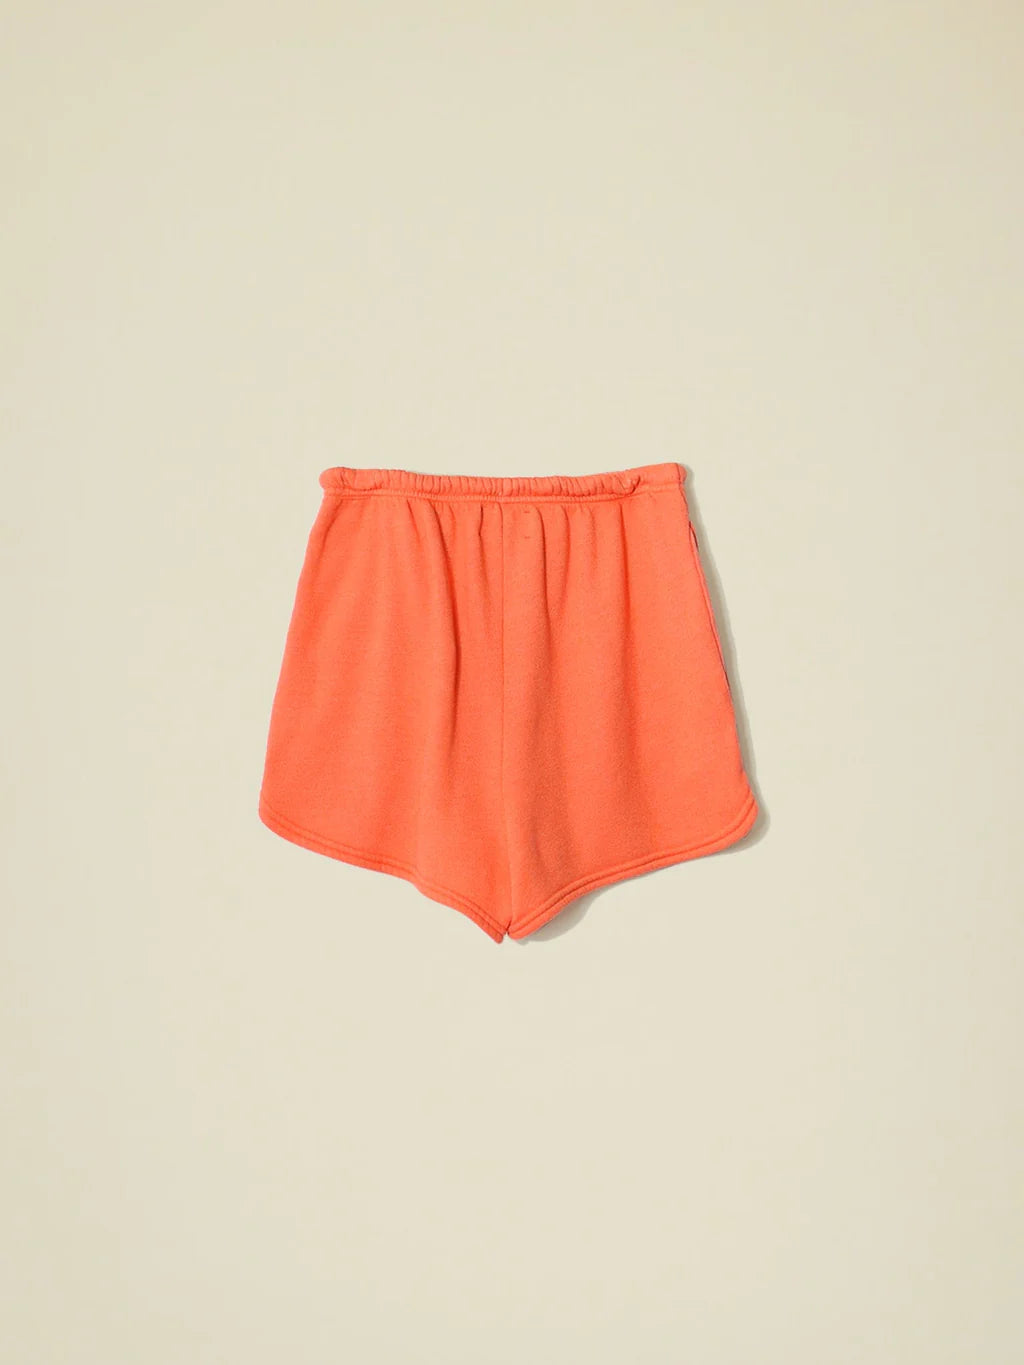 Mimie Shorts in Marmalade